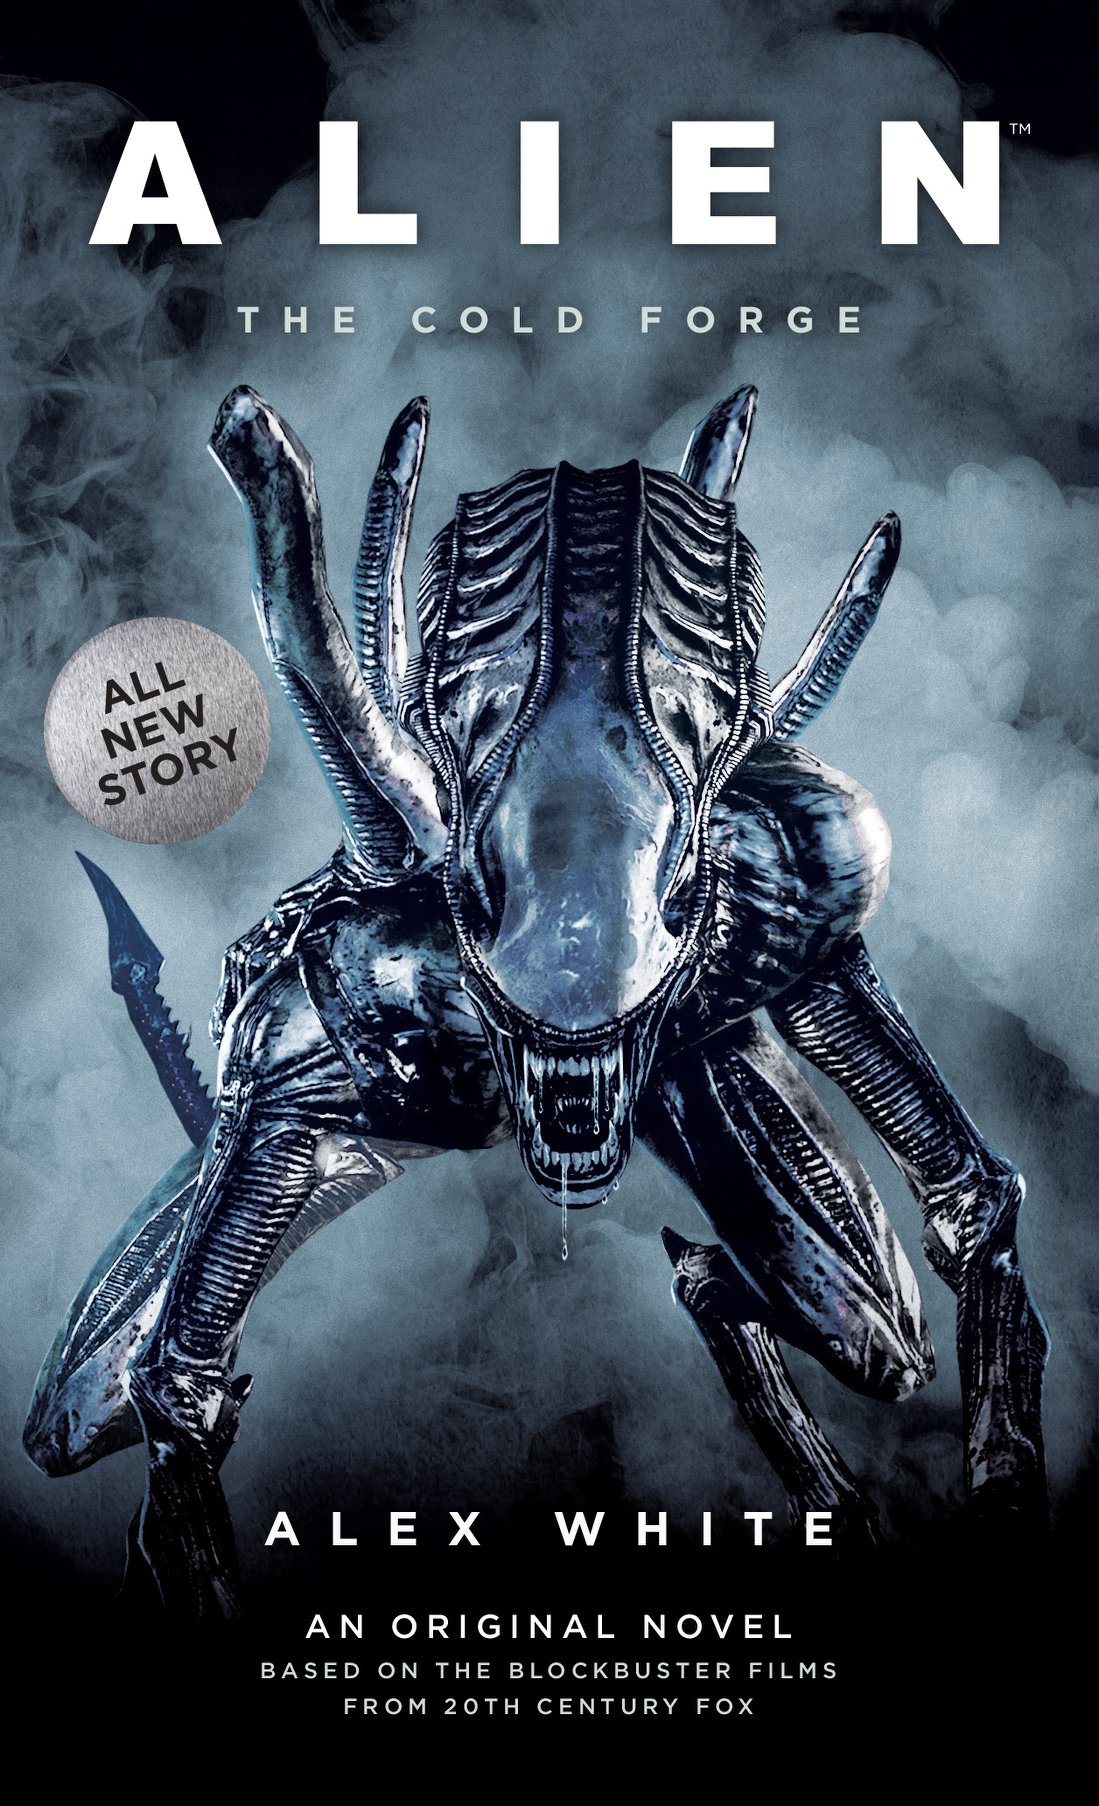 Friday Reads: Alien: The Cold Forge by Alex White